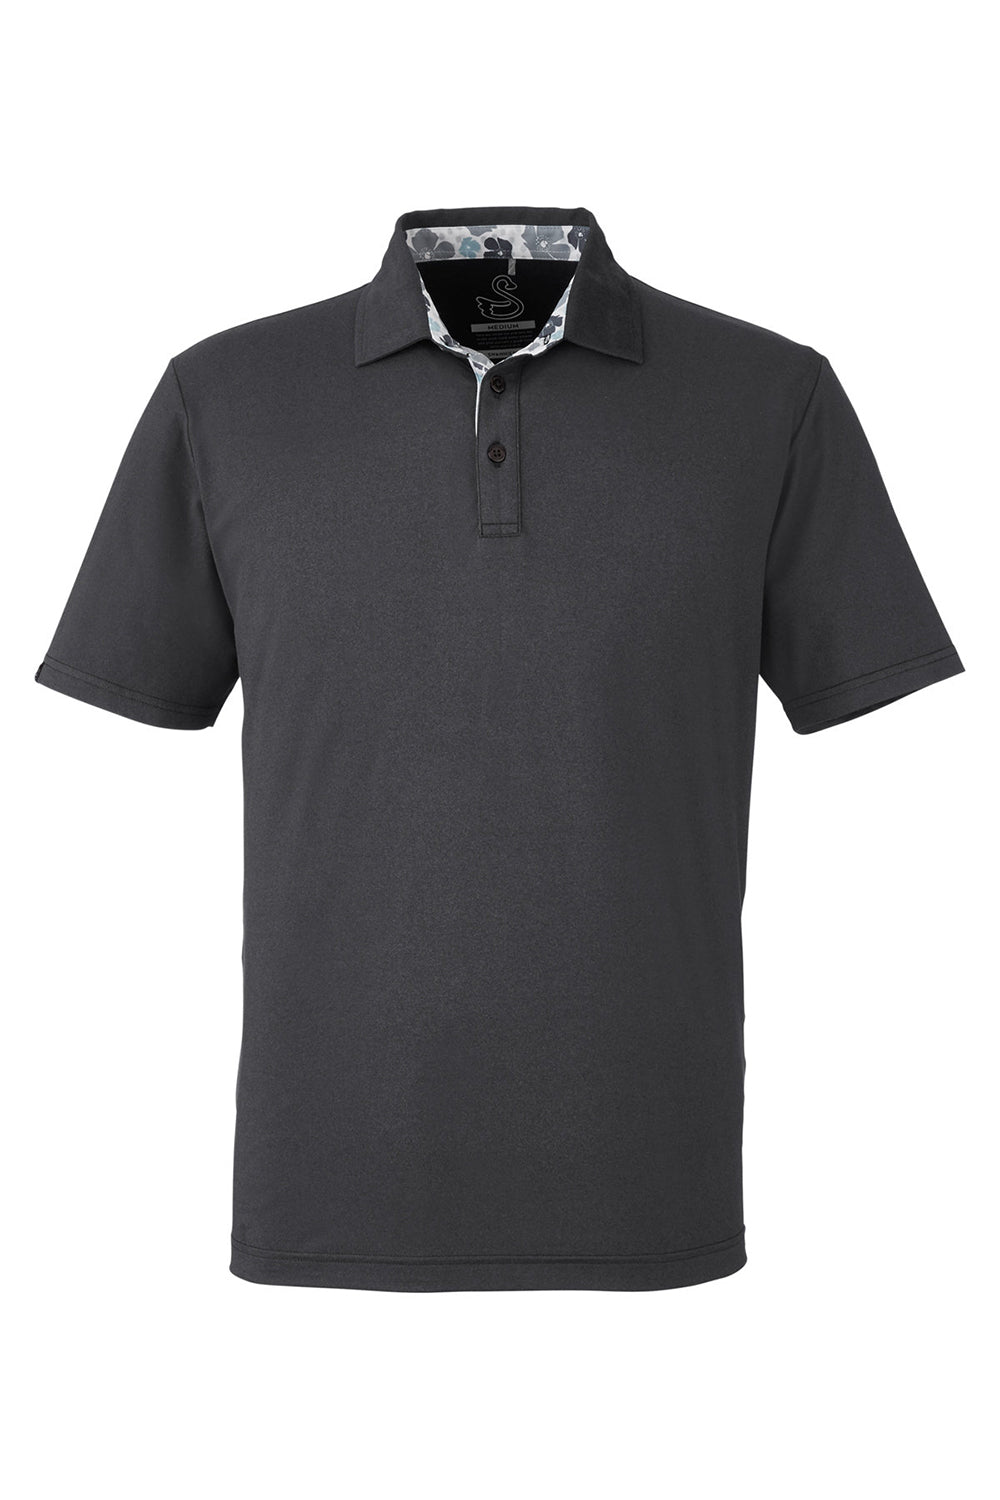 Swannies Golf SW2000 Mens James Short Sleeve Polo Shirt Heather Black Flat Front